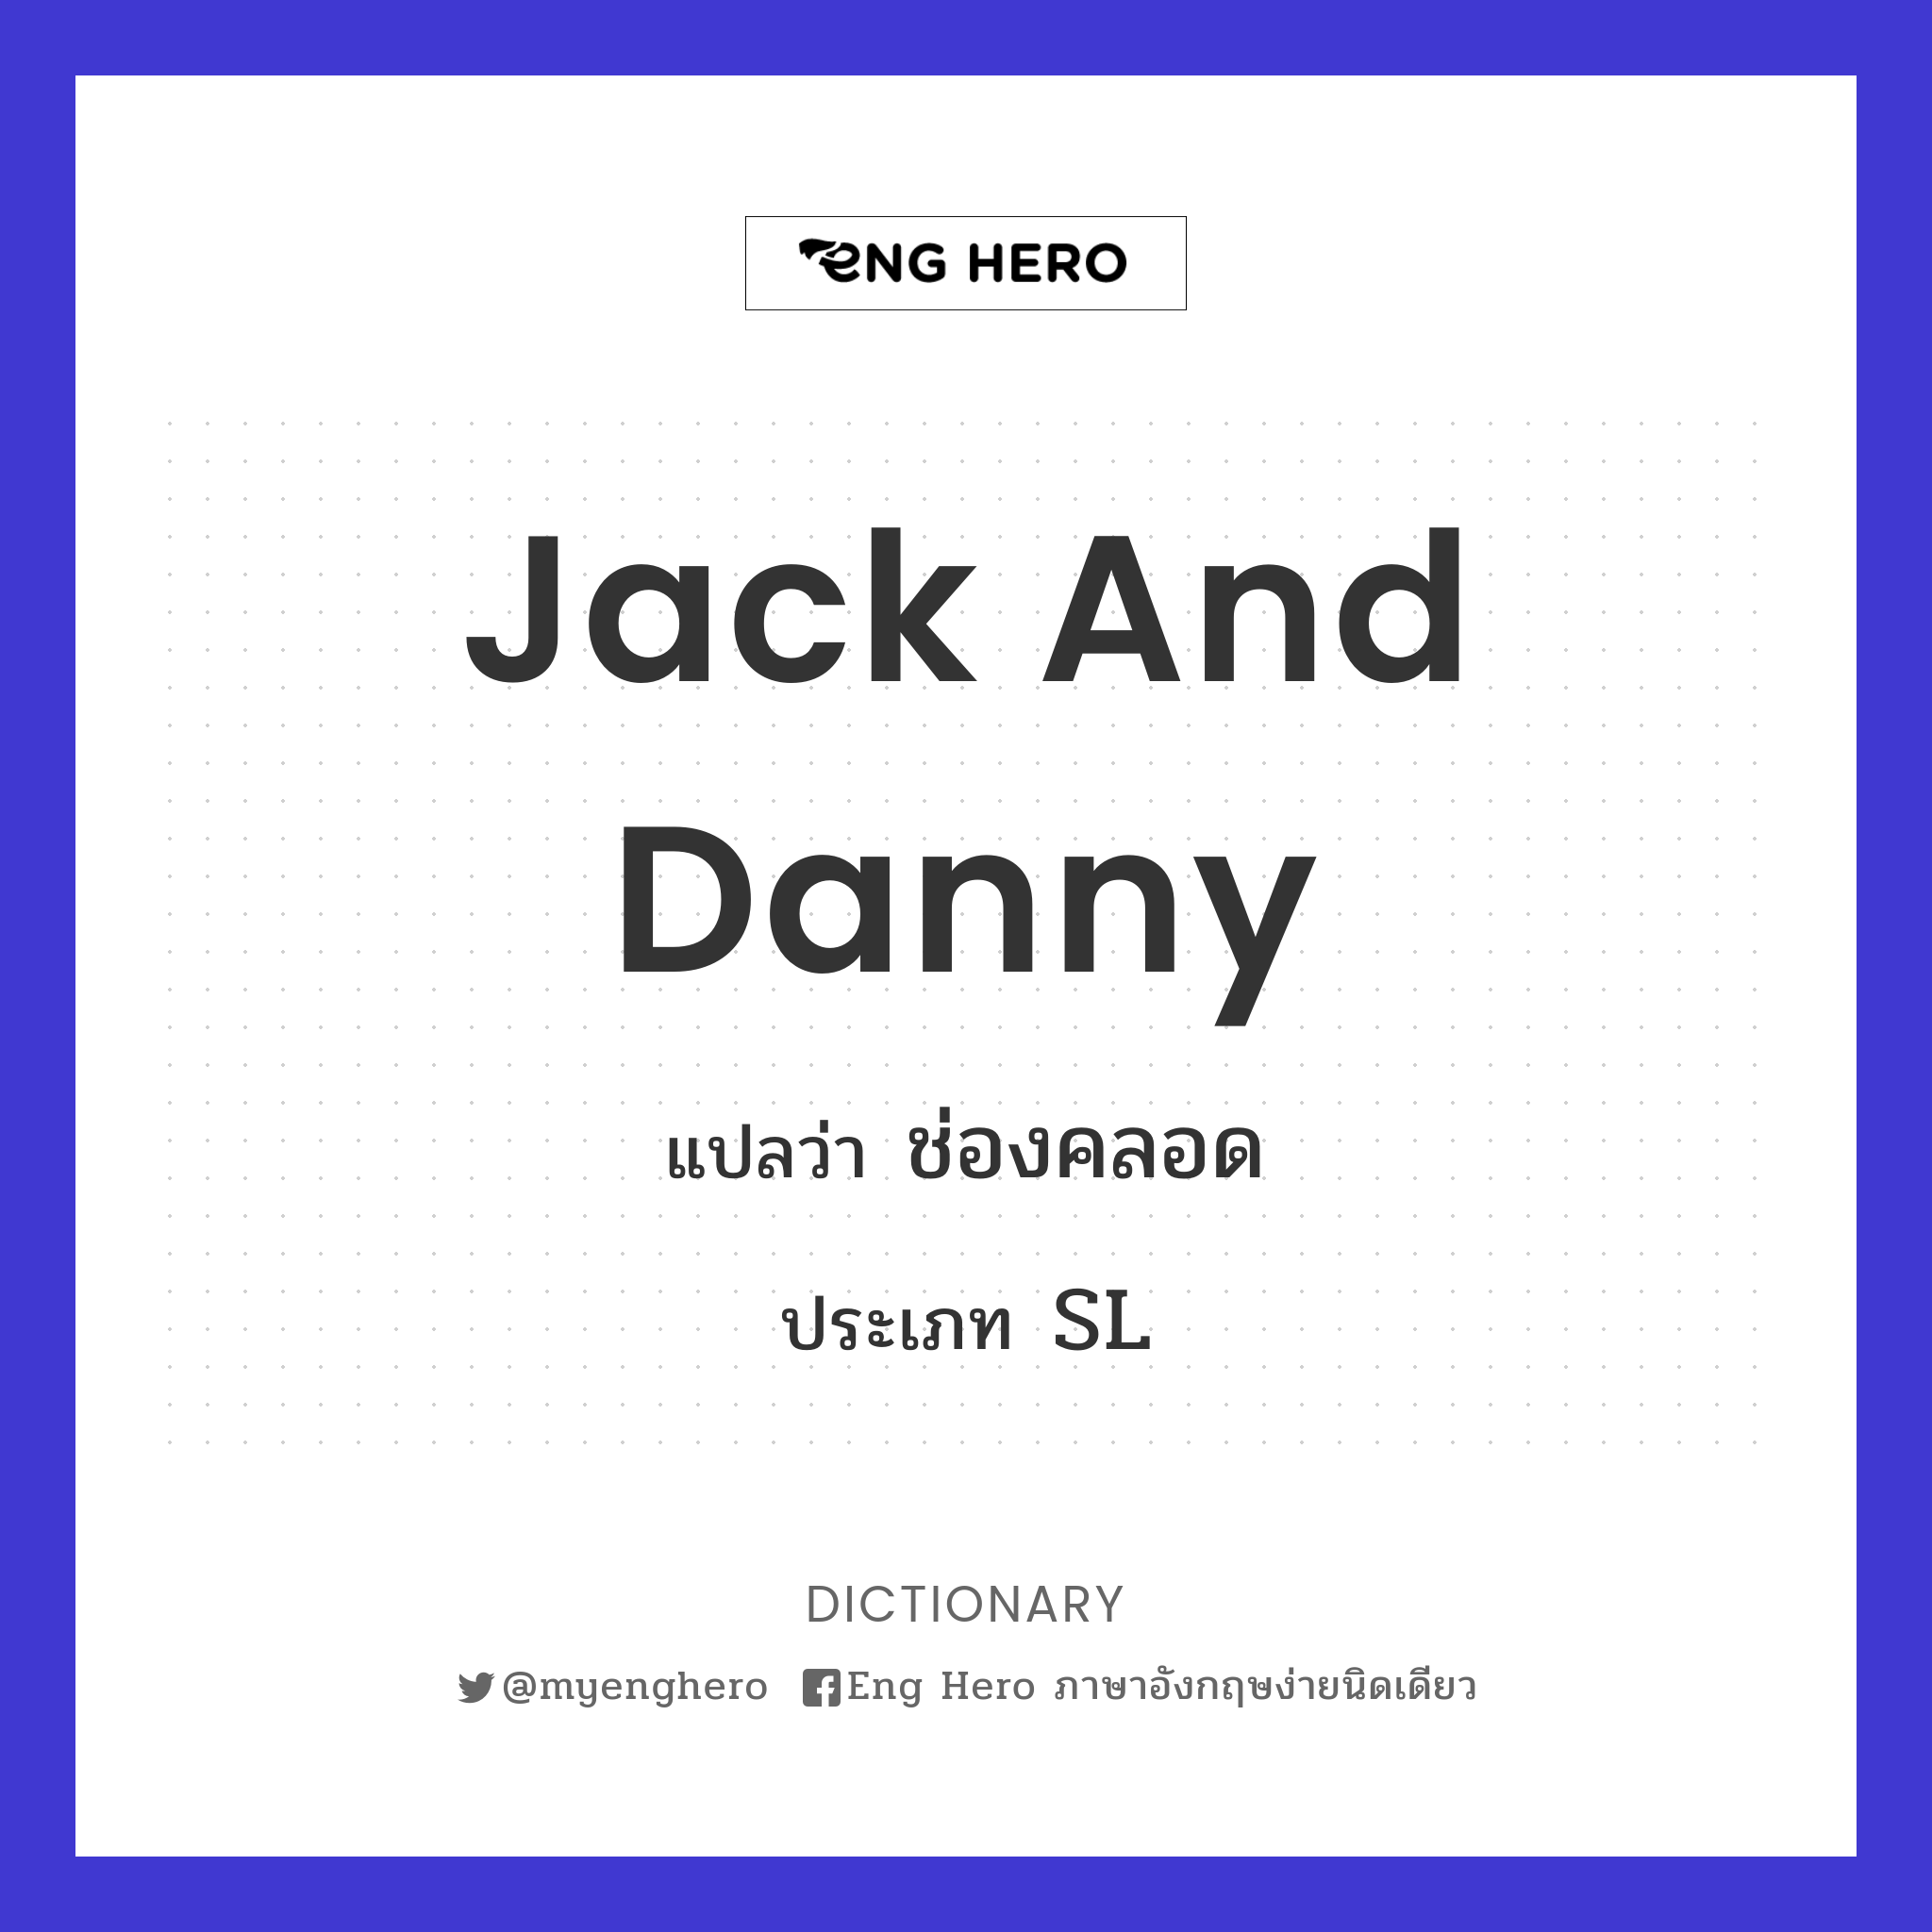 Jack and Danny